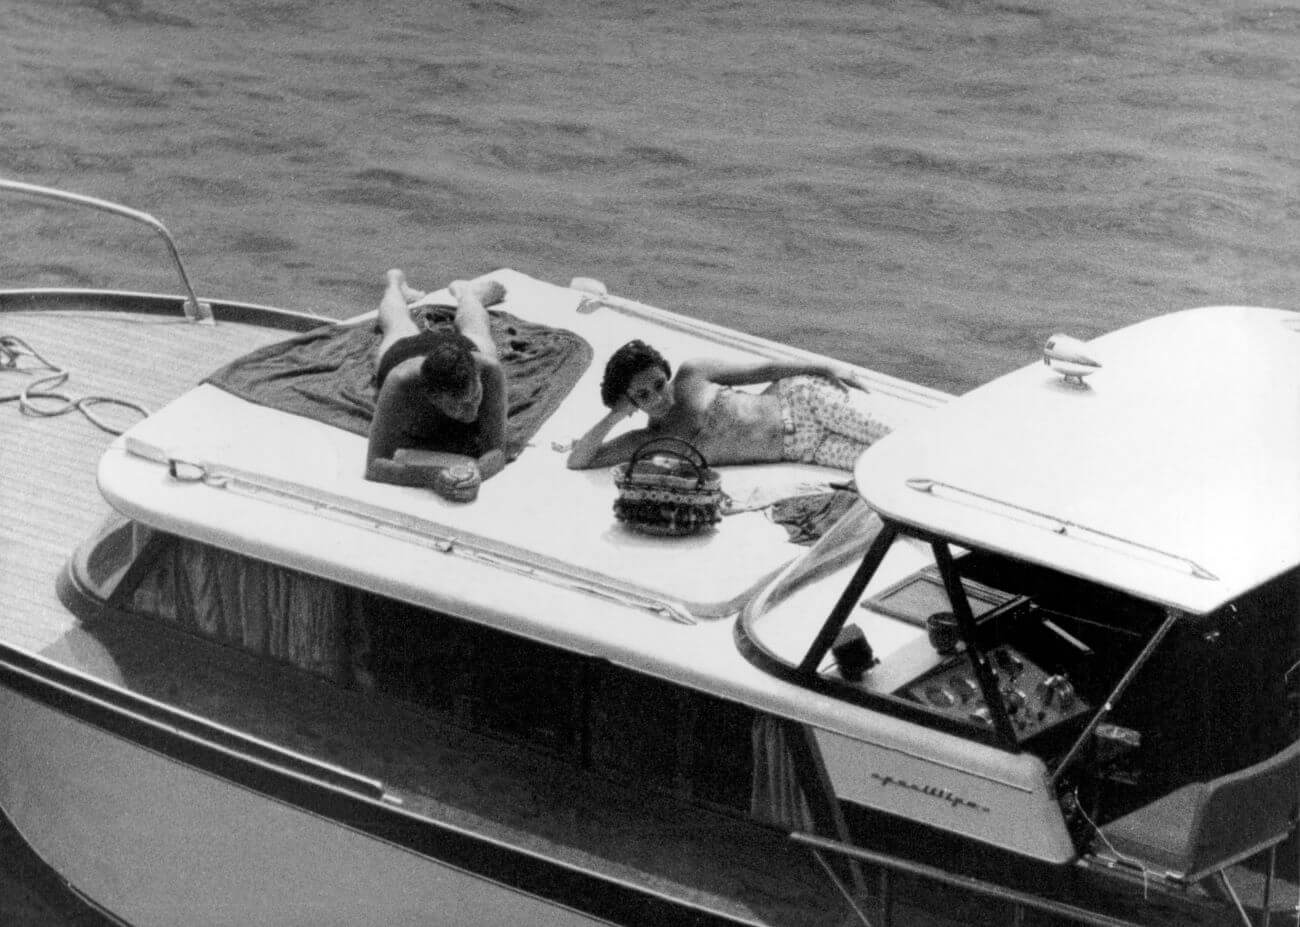 A black and white picture of Richard Burton and Elizabeth Taylor laying on a boat.